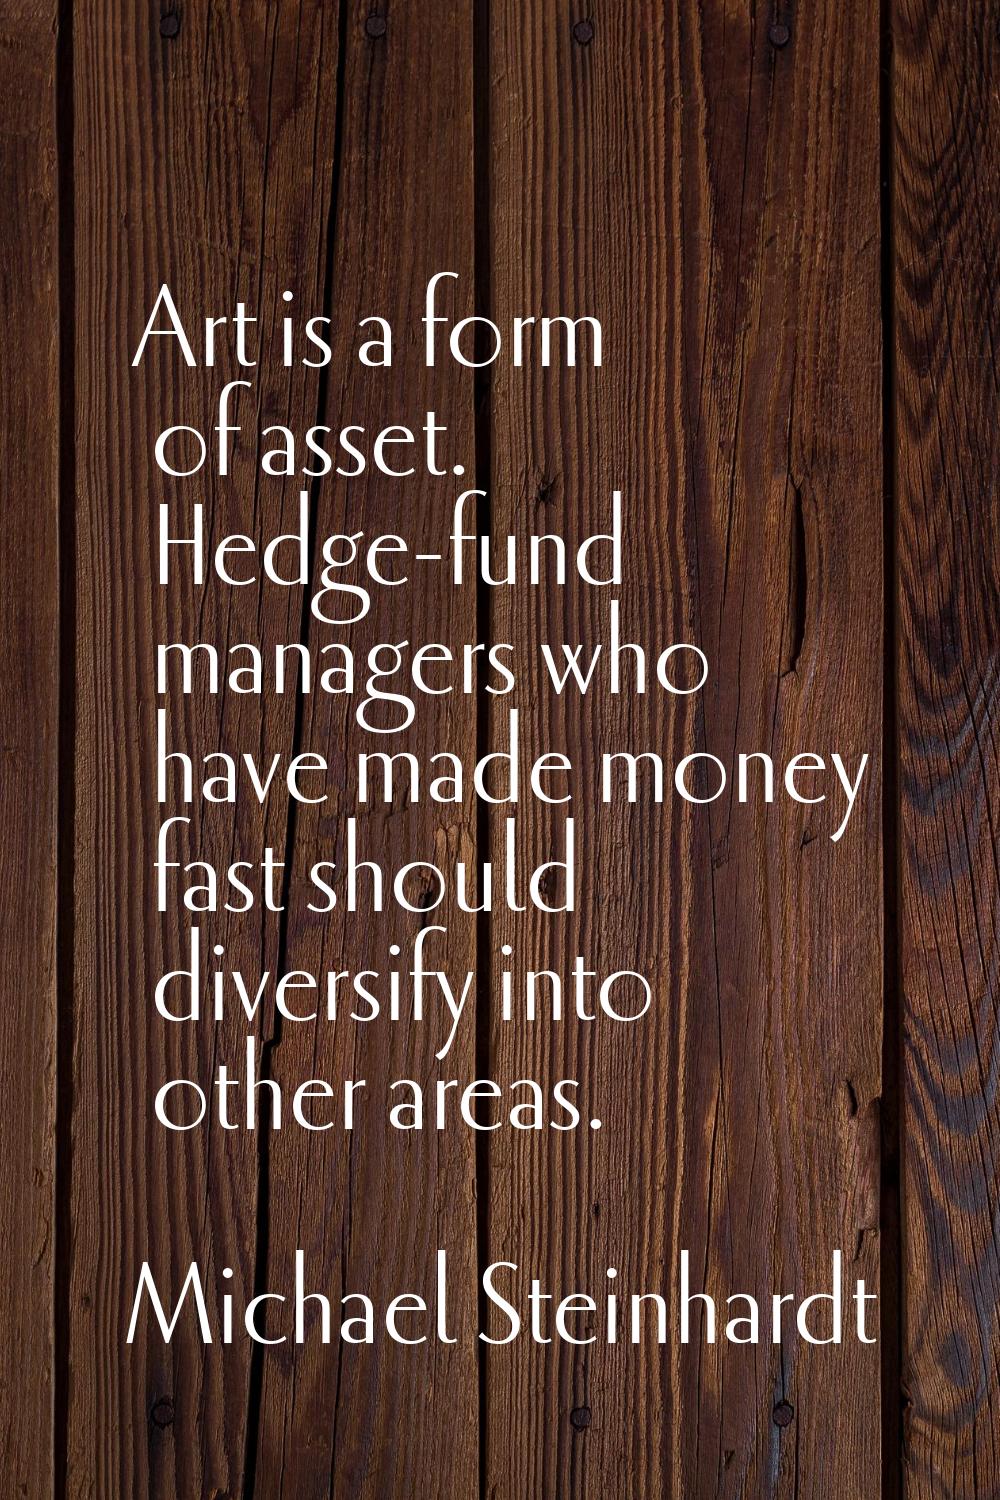 Art is a form of asset. Hedge-fund managers who have made money fast should diversify into other ar